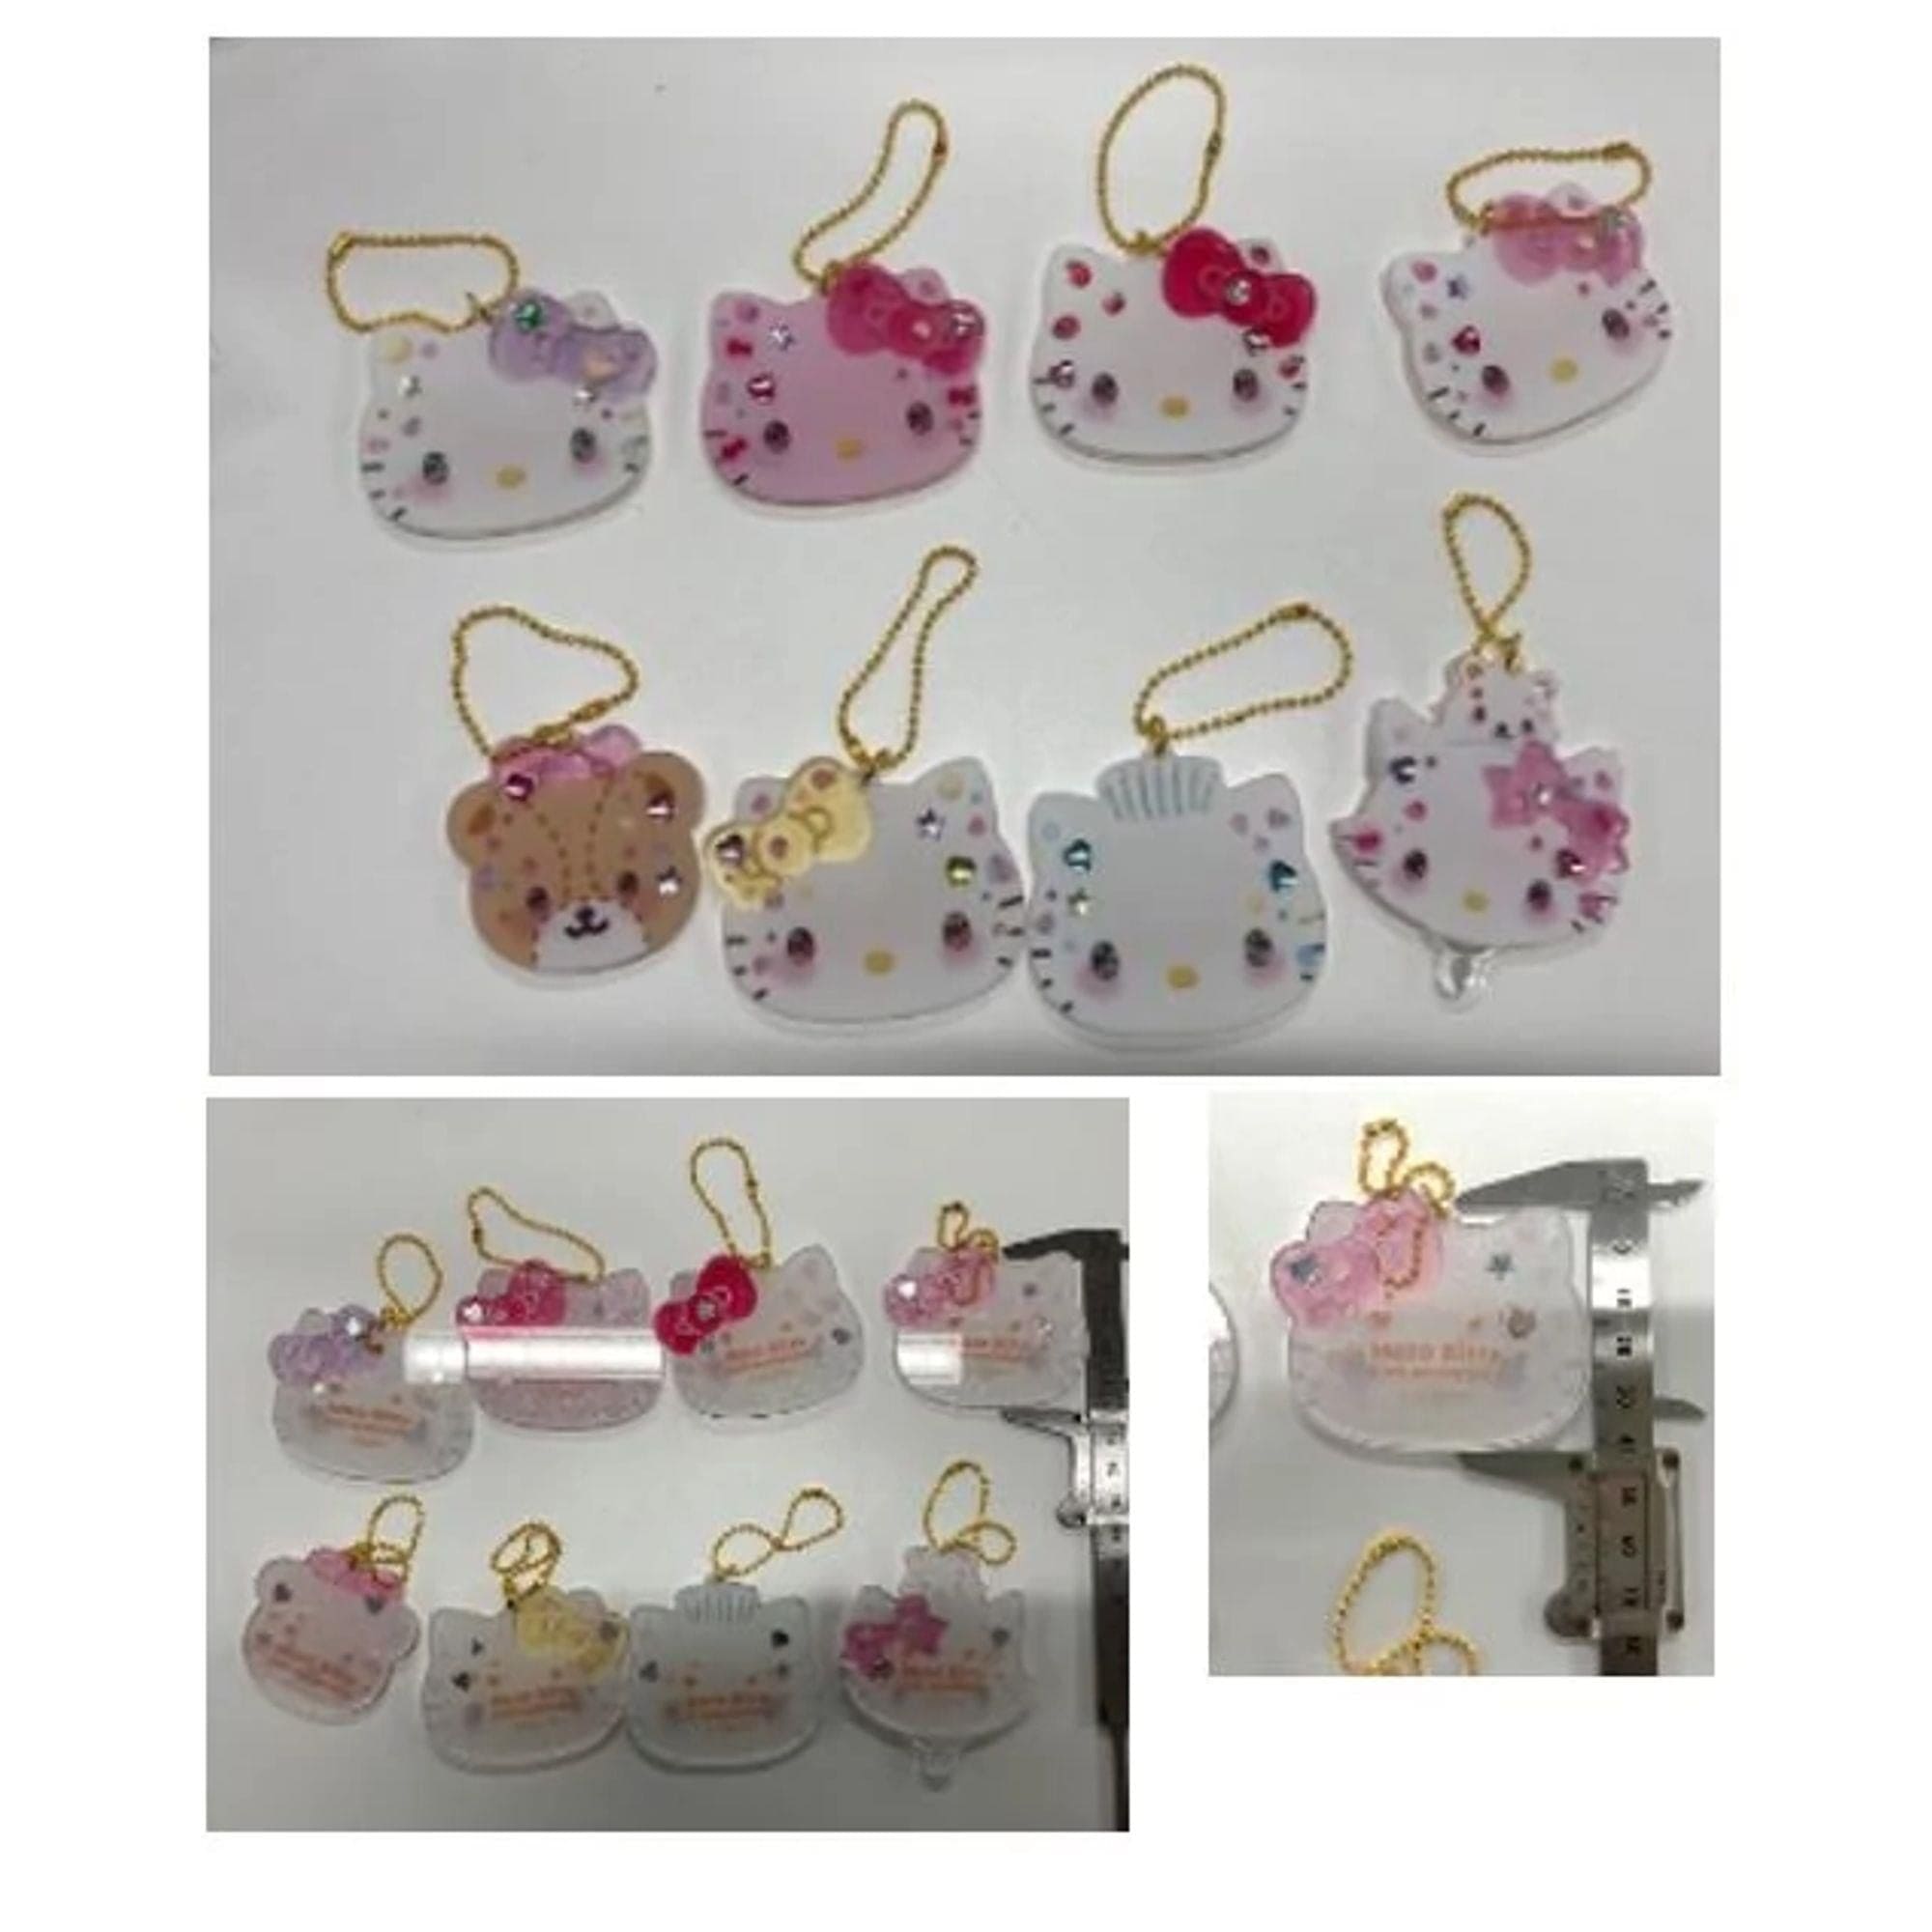 Enesco Hello Kitty 50th Anniversary Surprise Keychains: Sparkly Faces Kawaii Gifts